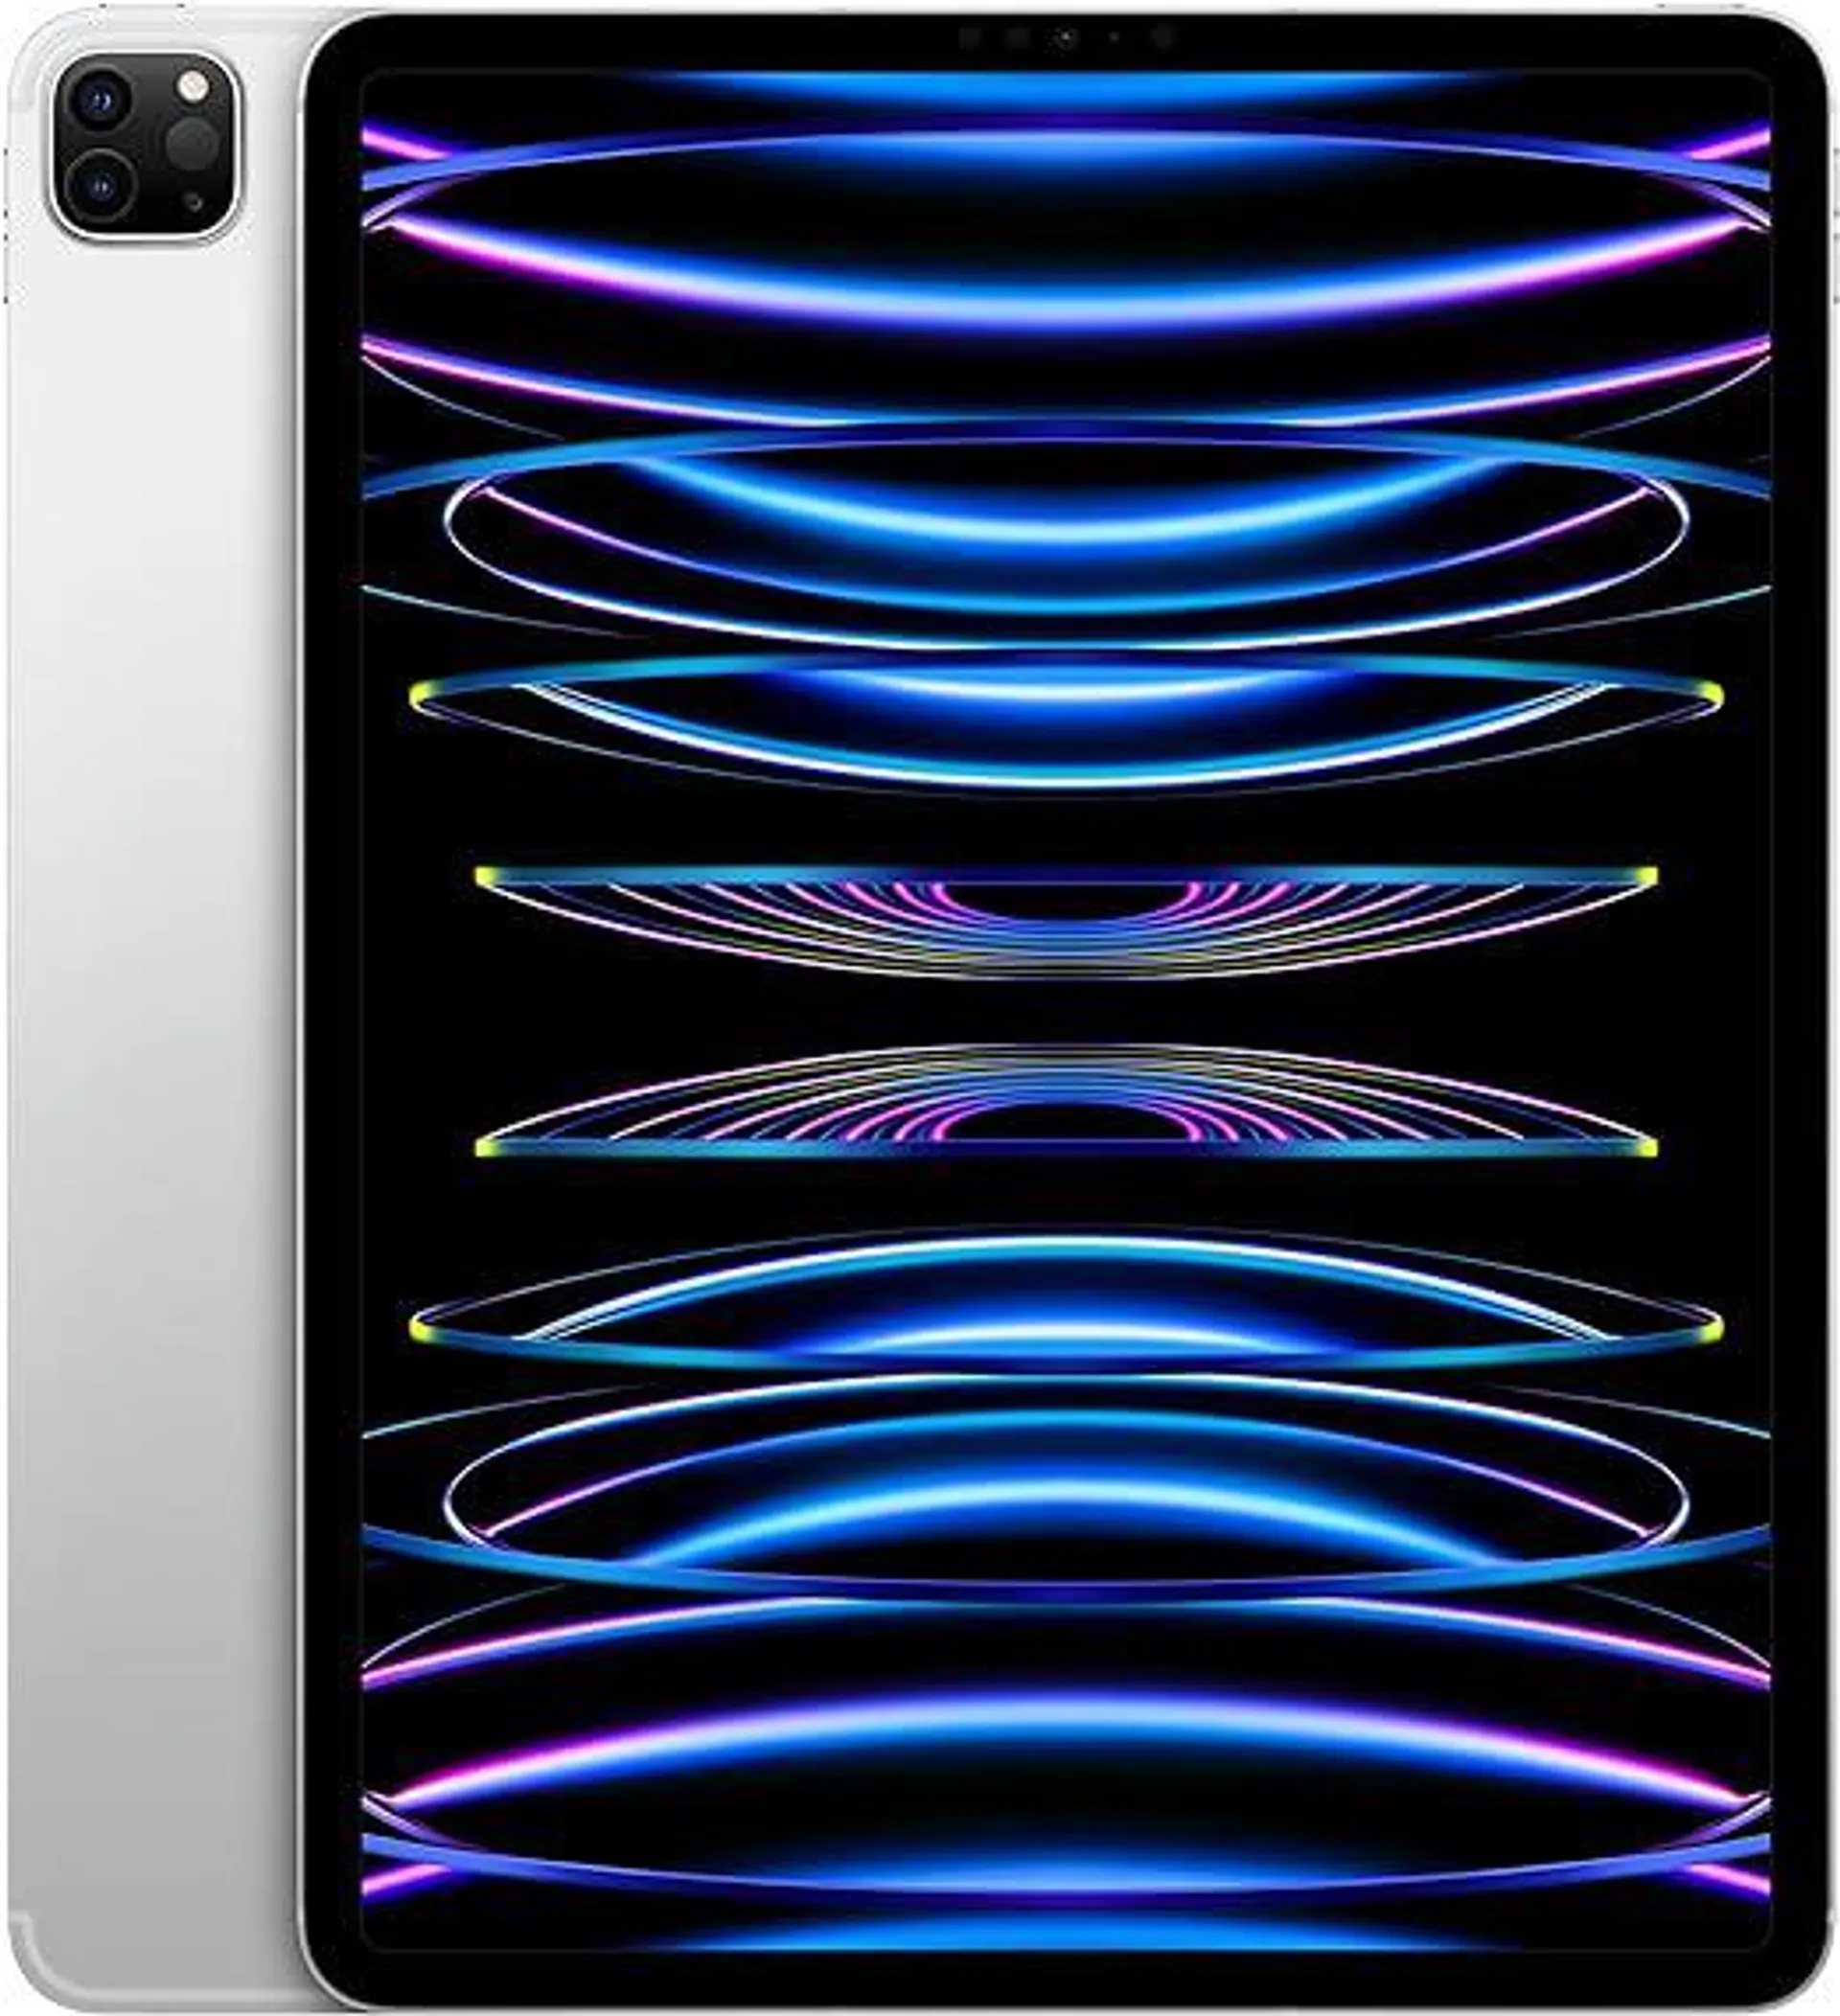 Apple iPad Pro 12.9-inch (6th Generation): with M2 chip, Liquid Retina XDR Display, 128GB, Wi-Fi 6E + 5G Cellular, 12MP front/12MP and 10MP Back Cameras, Face ID, All-Day Battery Life – Silver